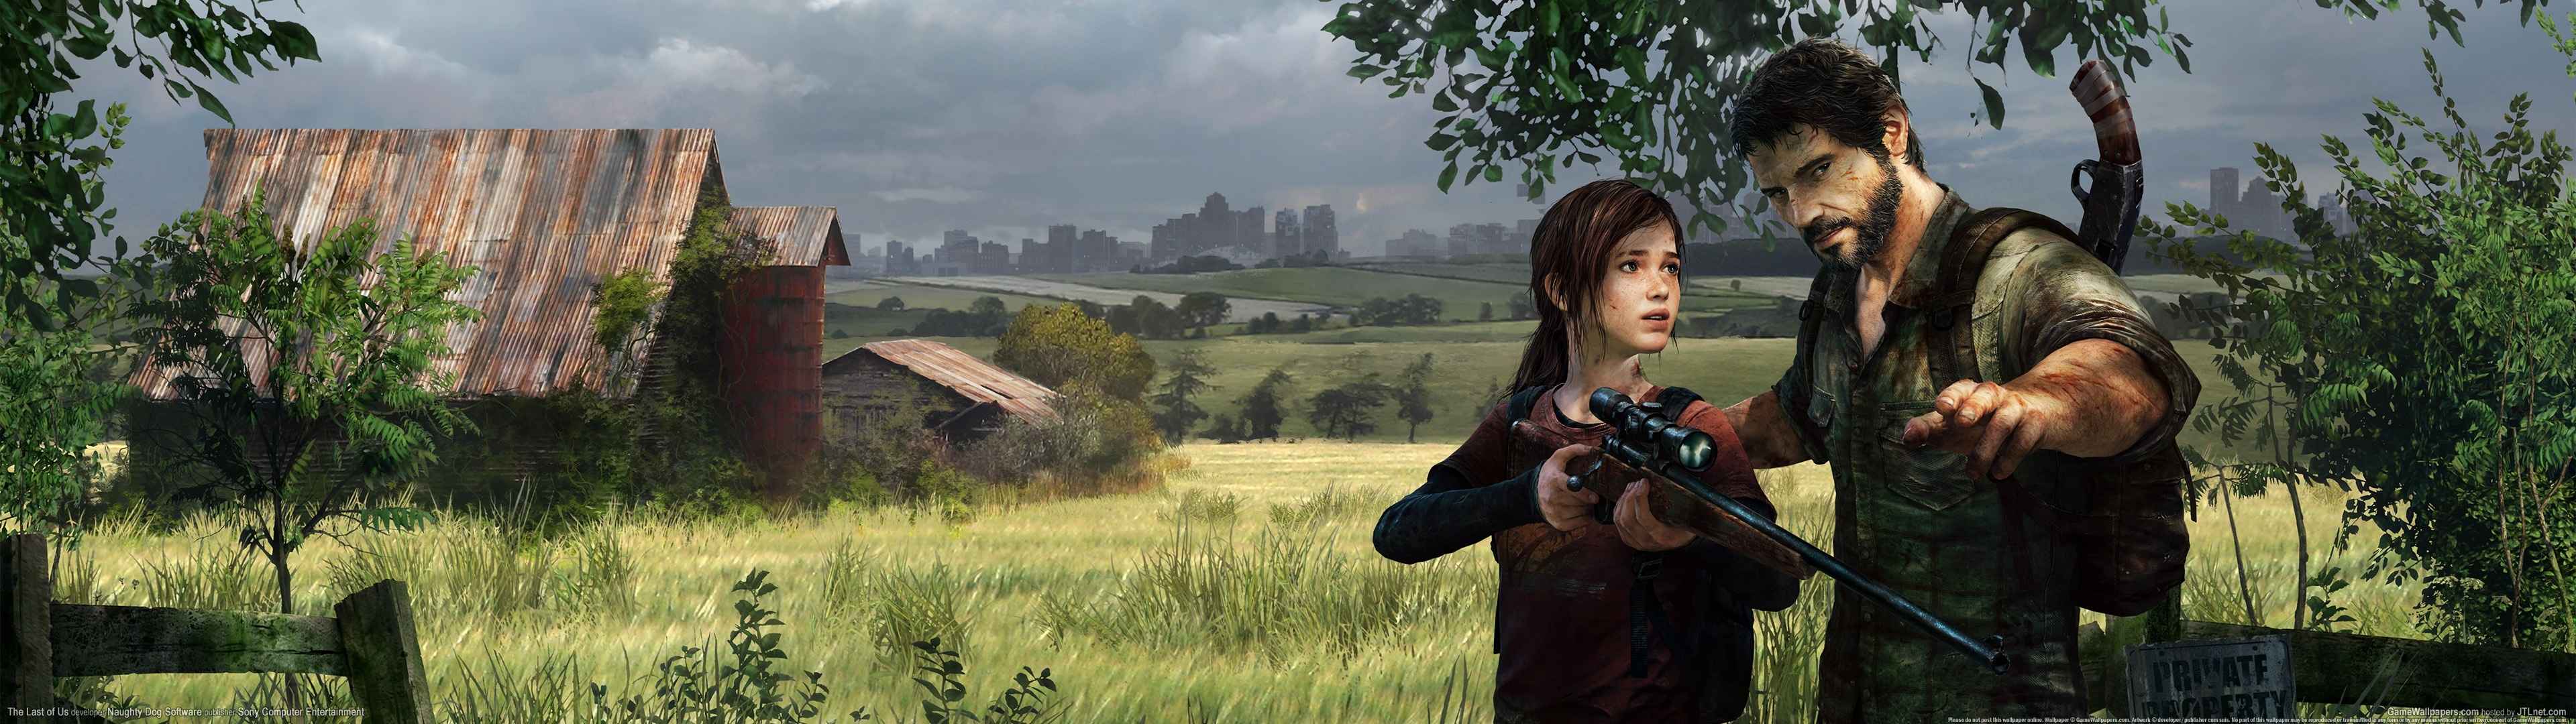 The Last of Us 3840x1080壁纸-